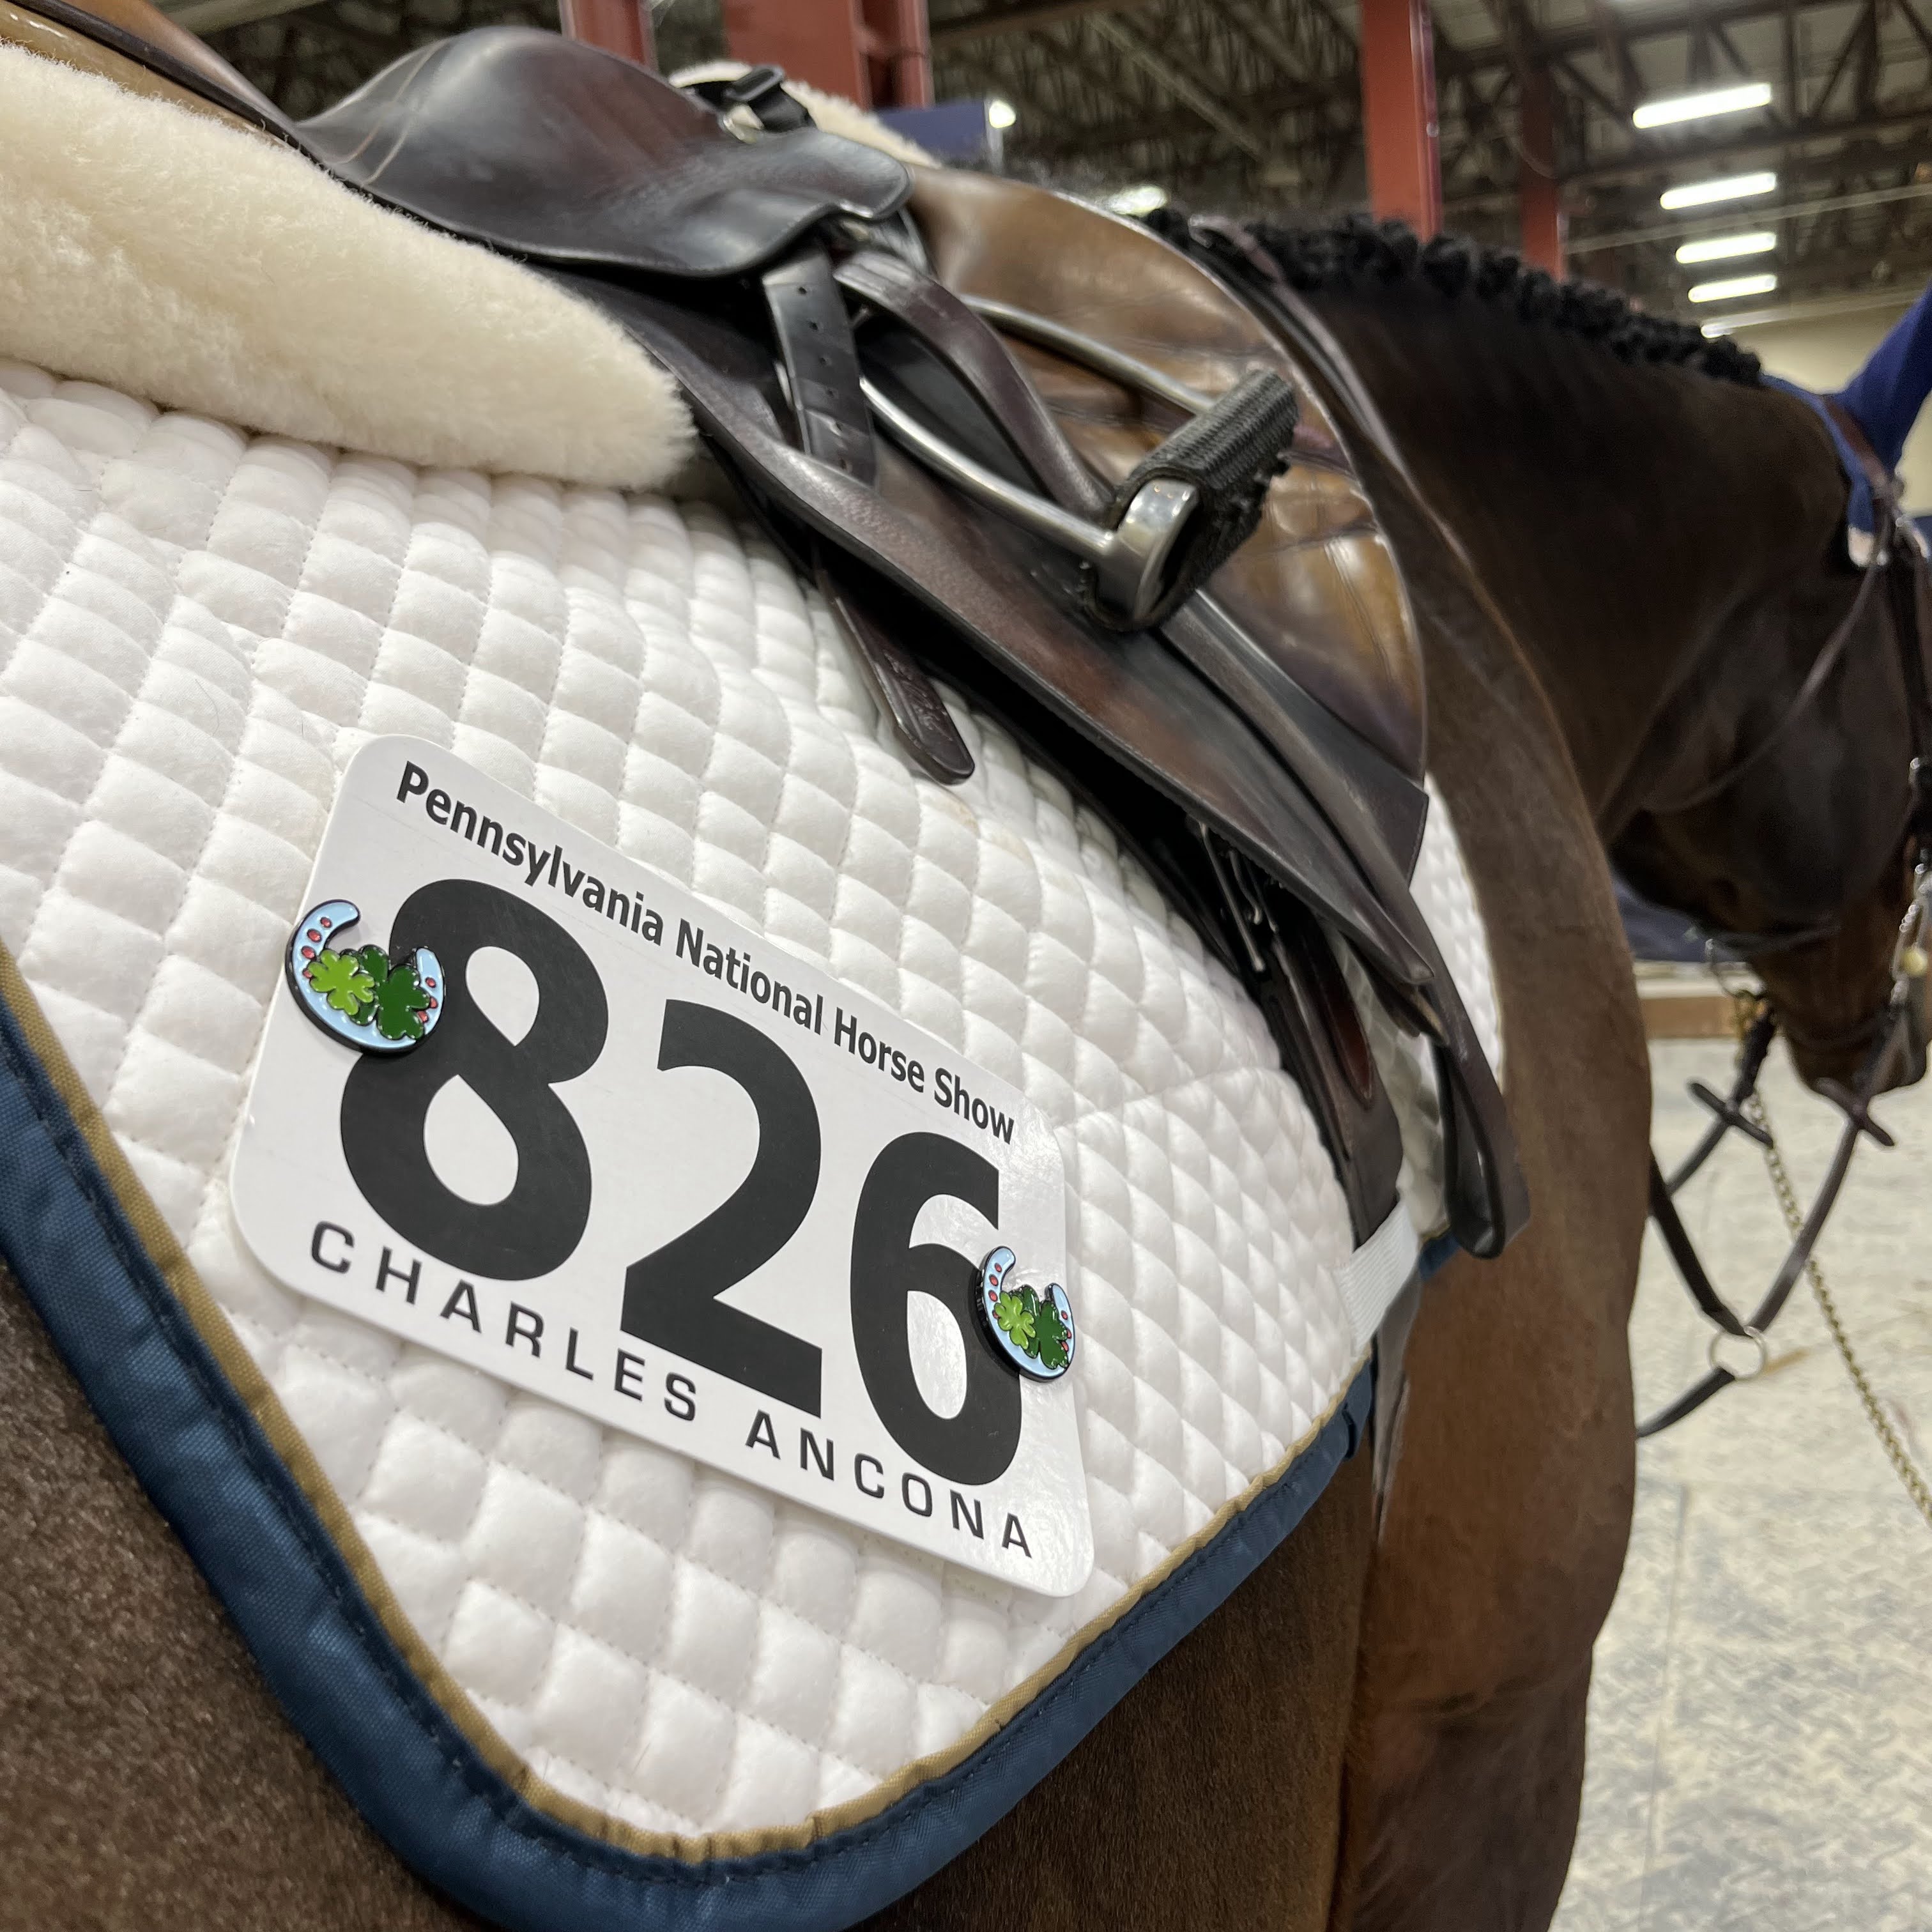 Pinsnickety horseshoe horse show number pins on a saddle pad at the Pennsylvania National Horse Show